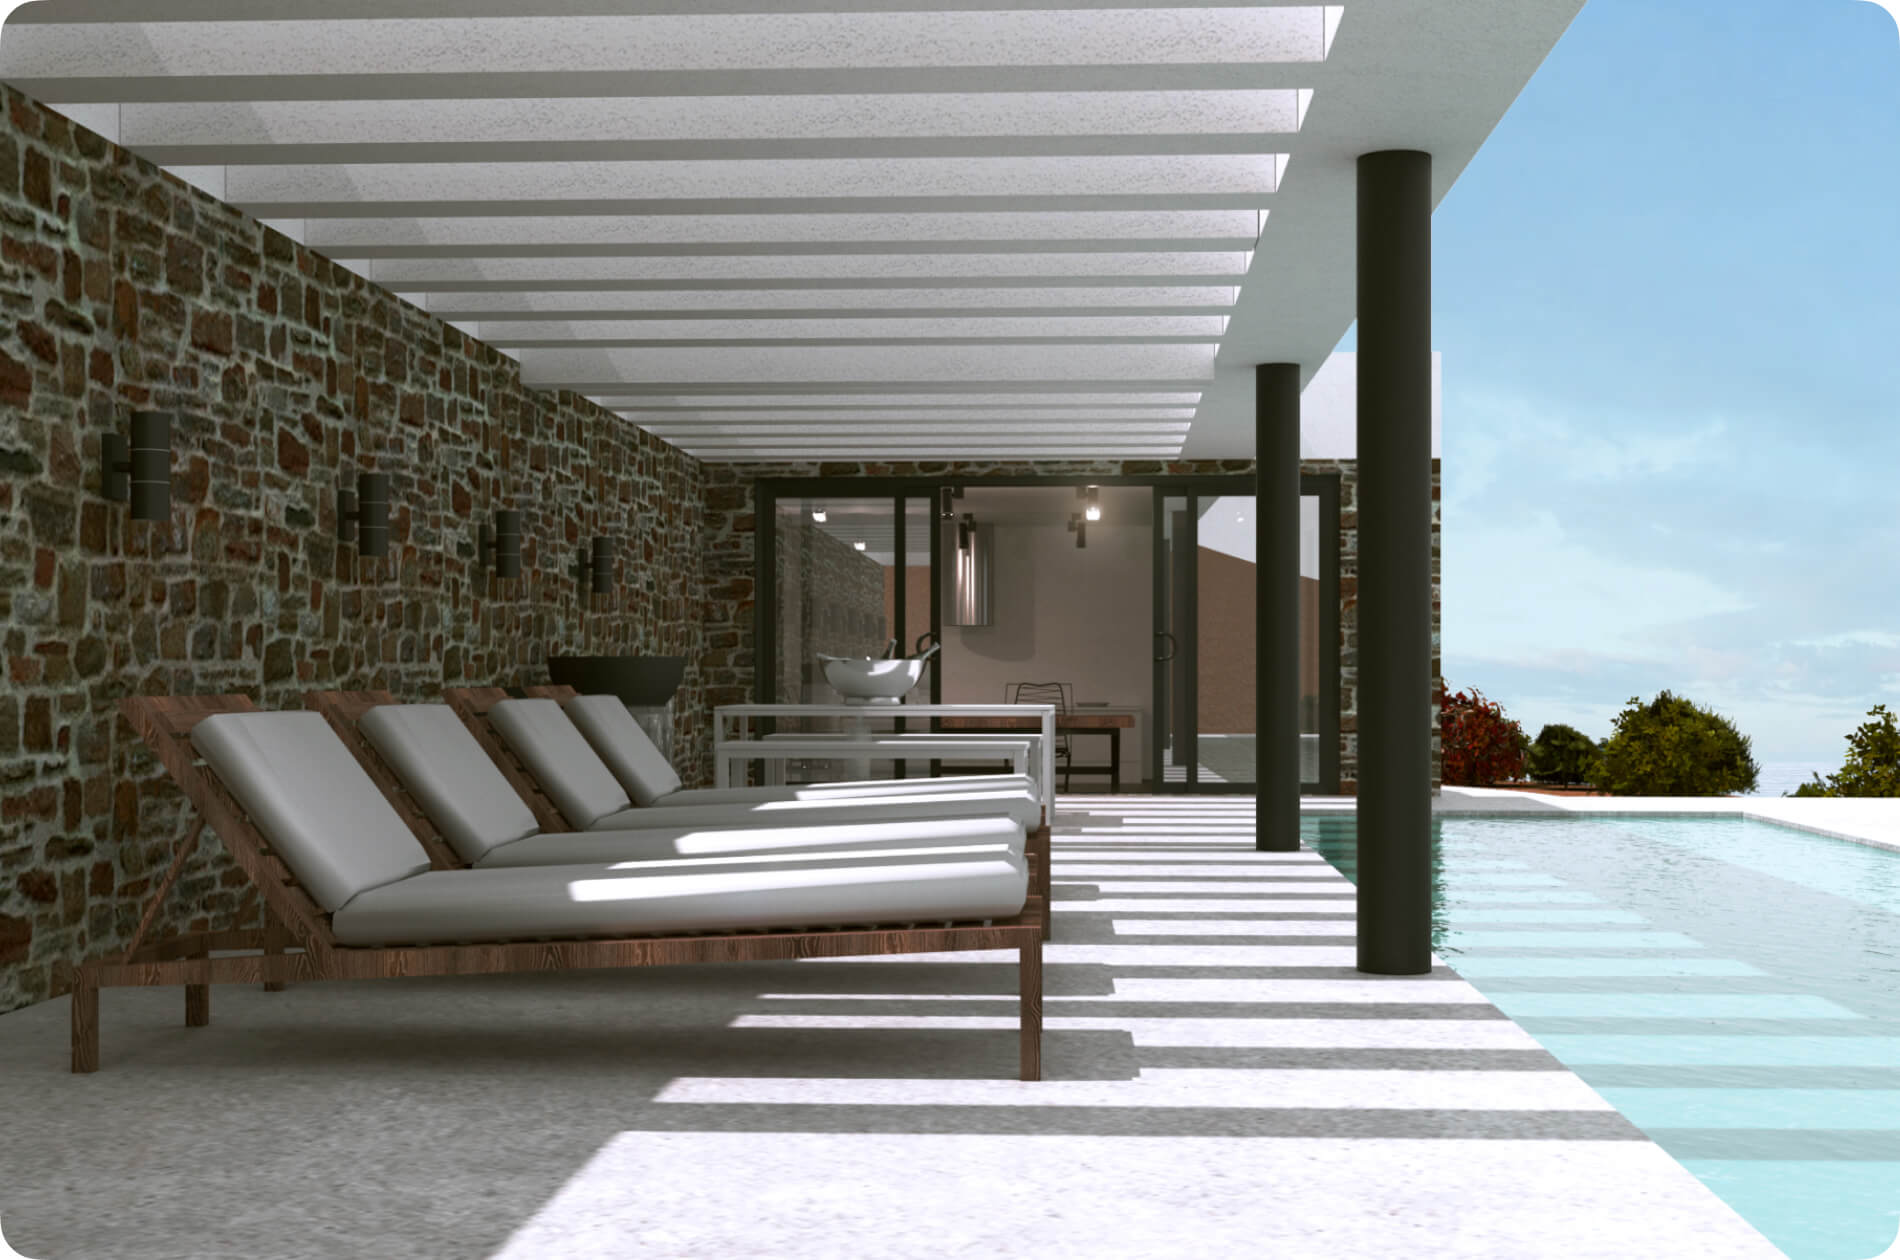 A pool area design at different time of day.